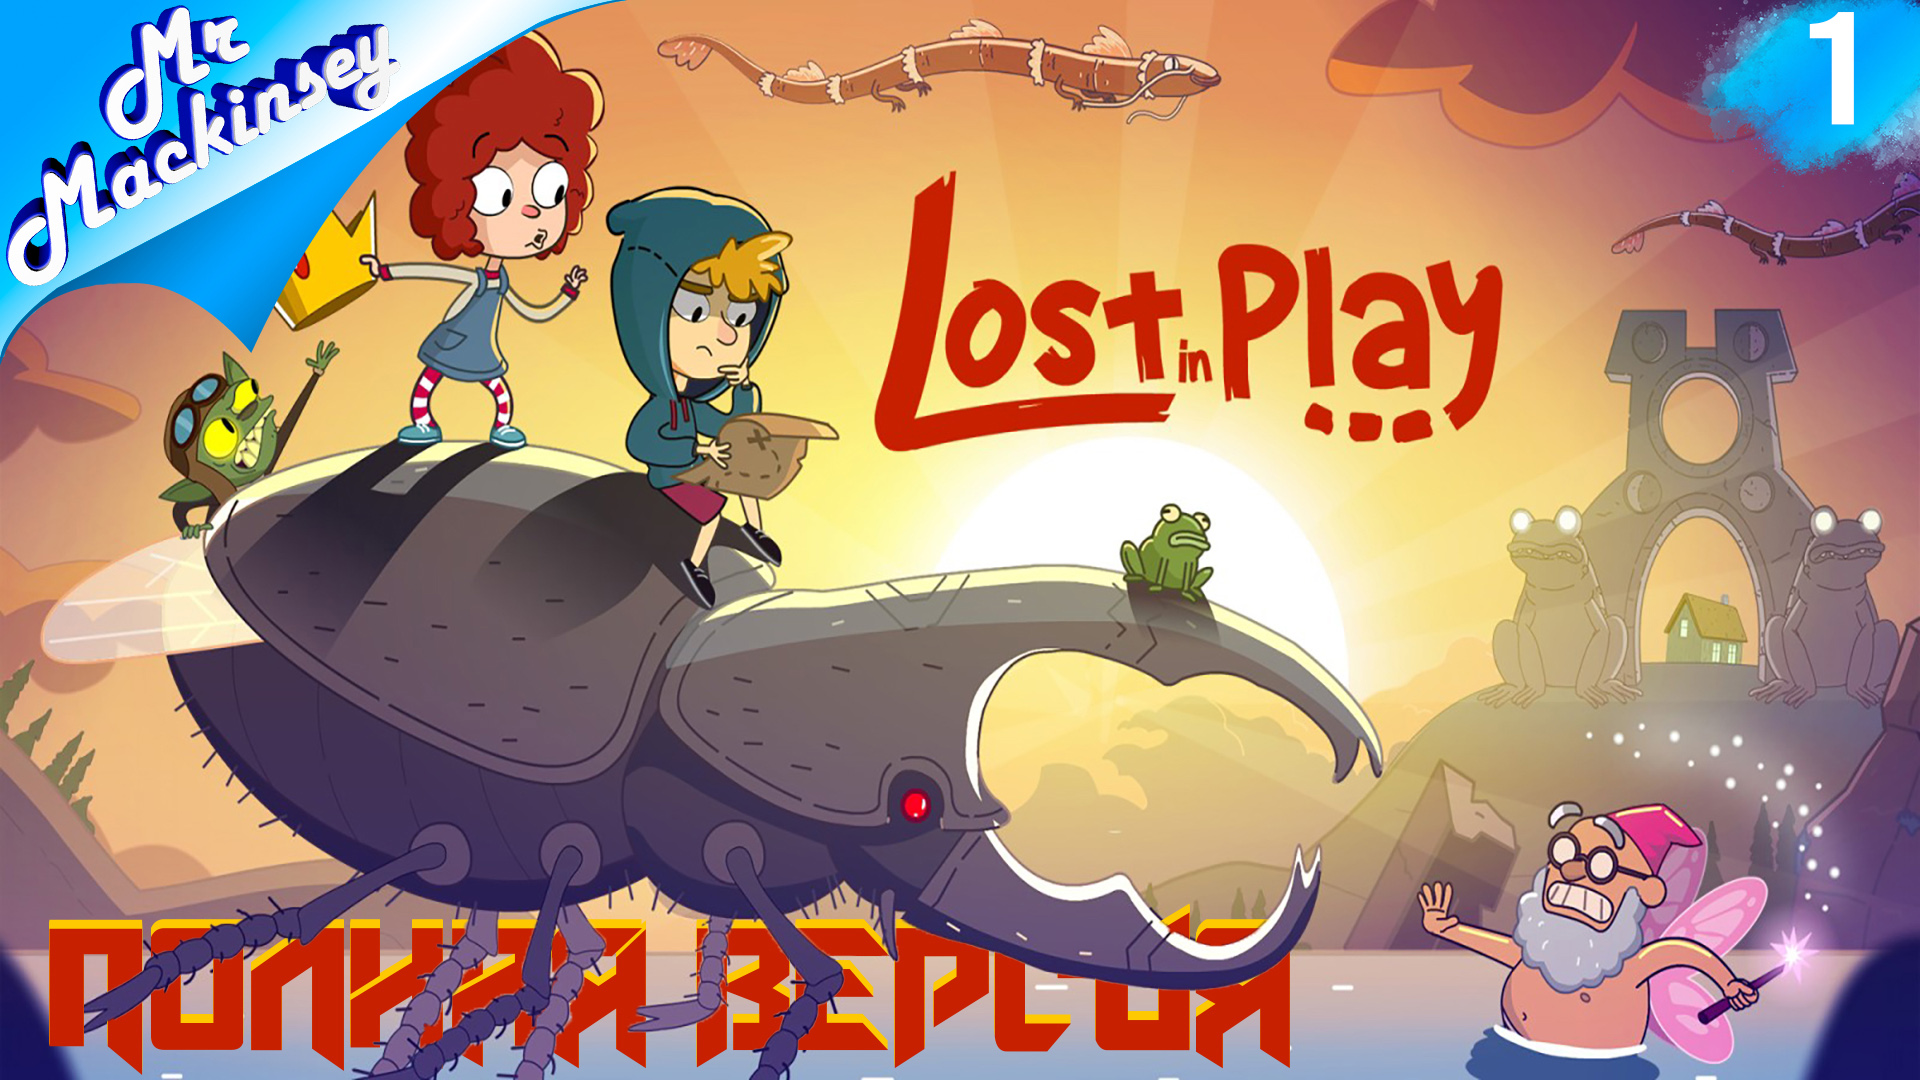 Lost in play похожие игры. Лост ин плей. Lost on Play игра. Лост ин плей персонажи. Lost in Play картинки.